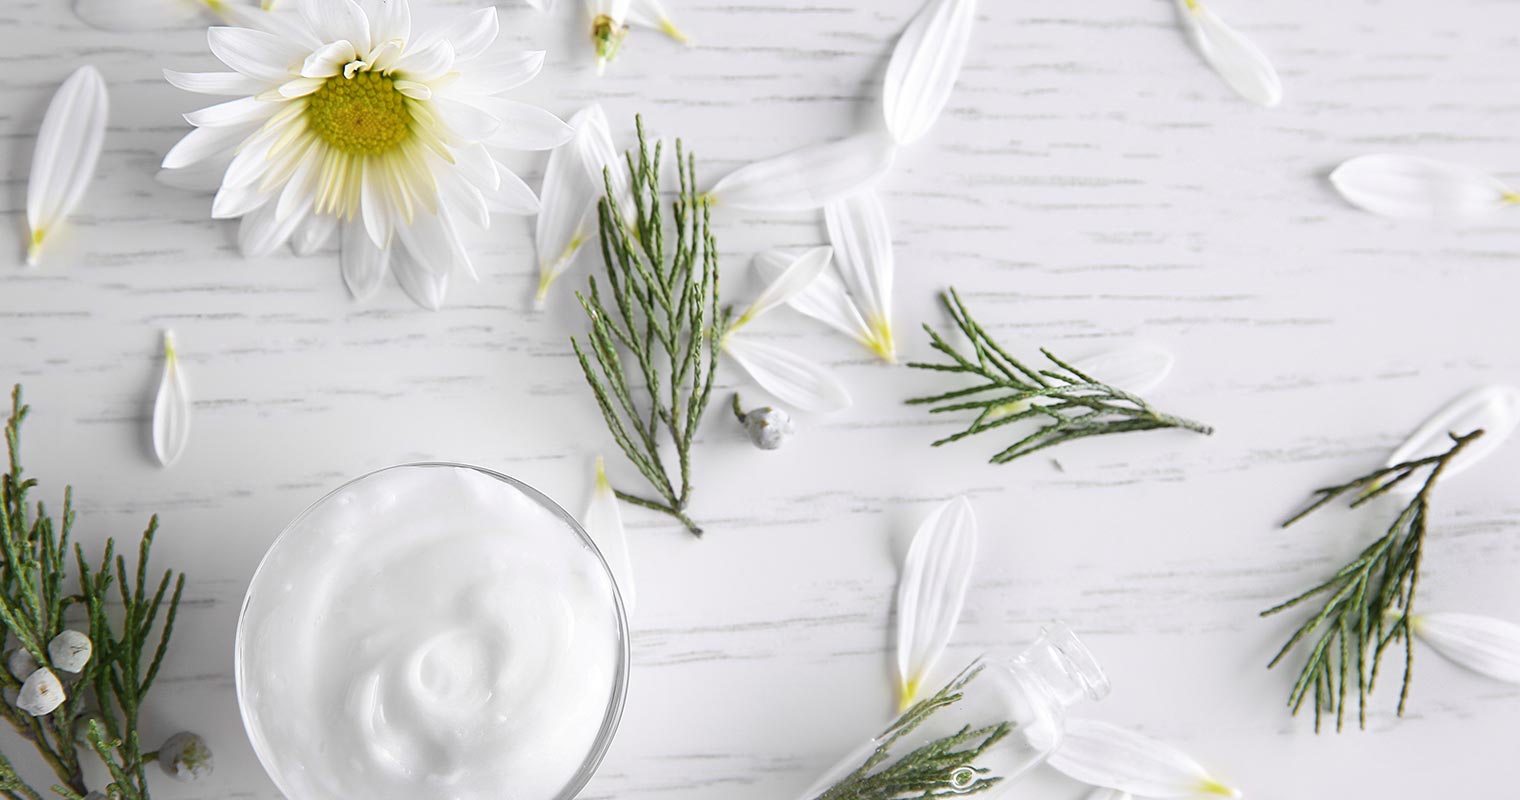 chamomile petals scattered on a table